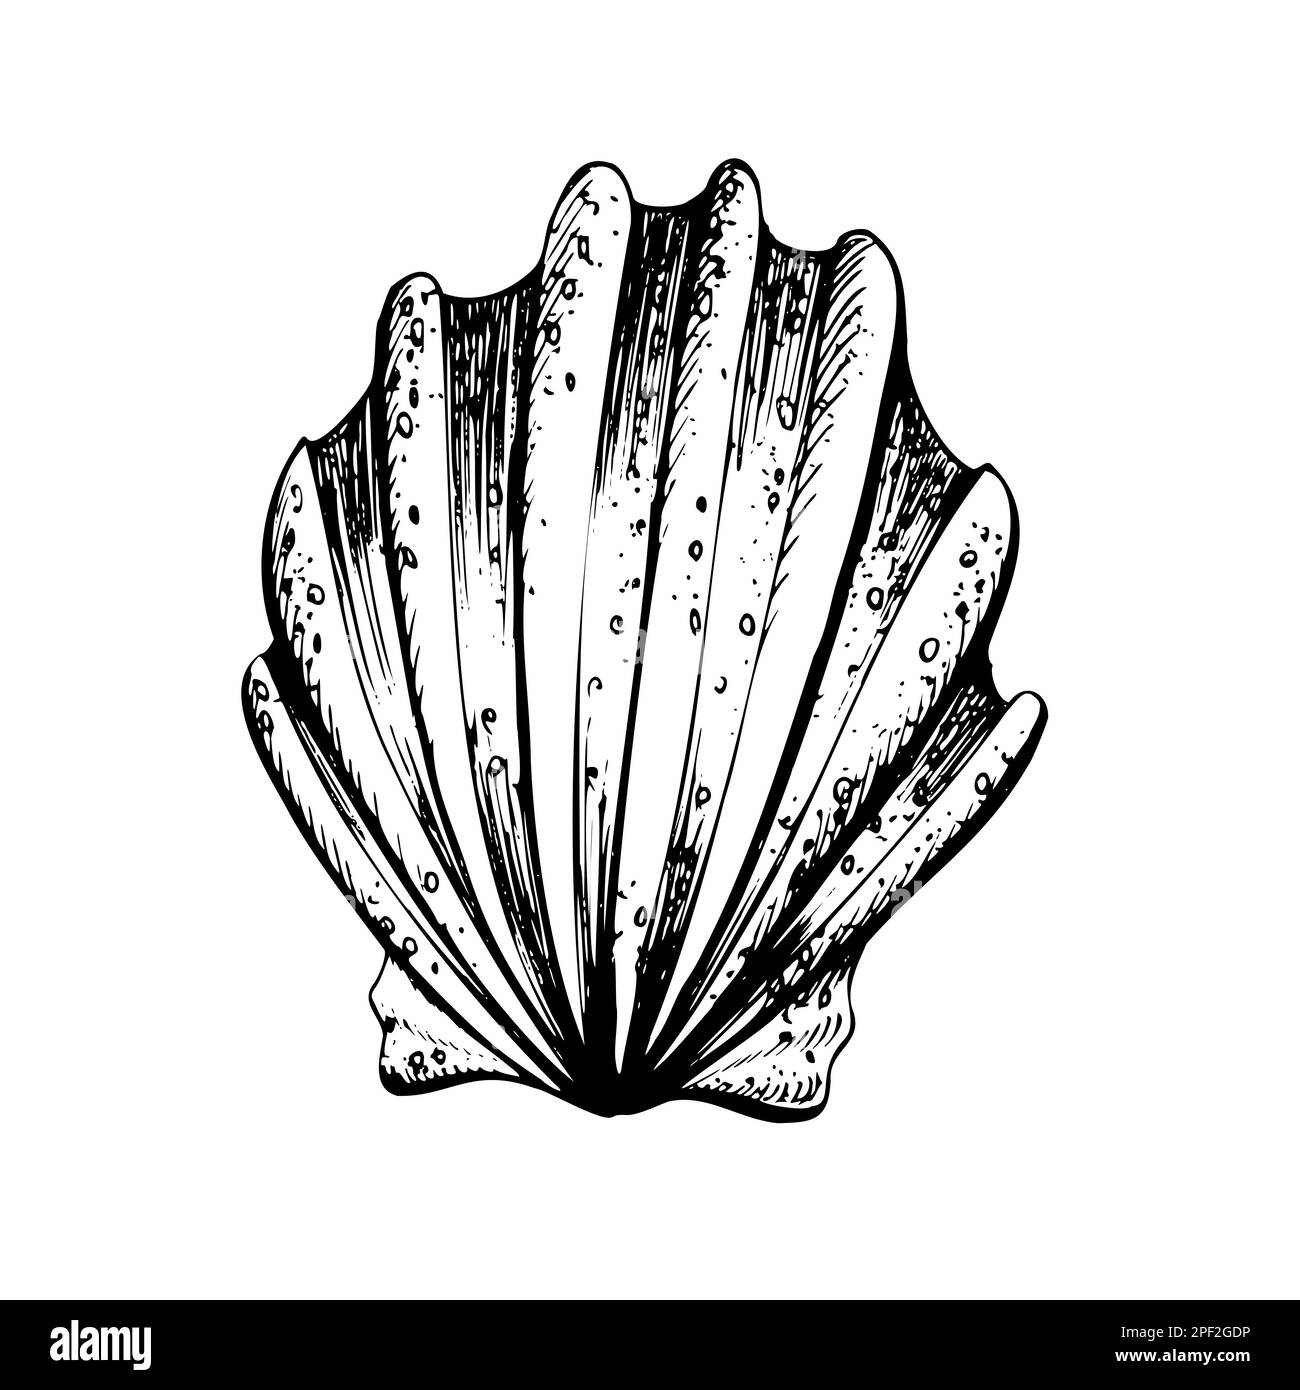 Seashell in the form of a fan. Isolated object drawn by hand in graphic technique. Vector illustration for beach, summer, nautical decoration and Stock Vector